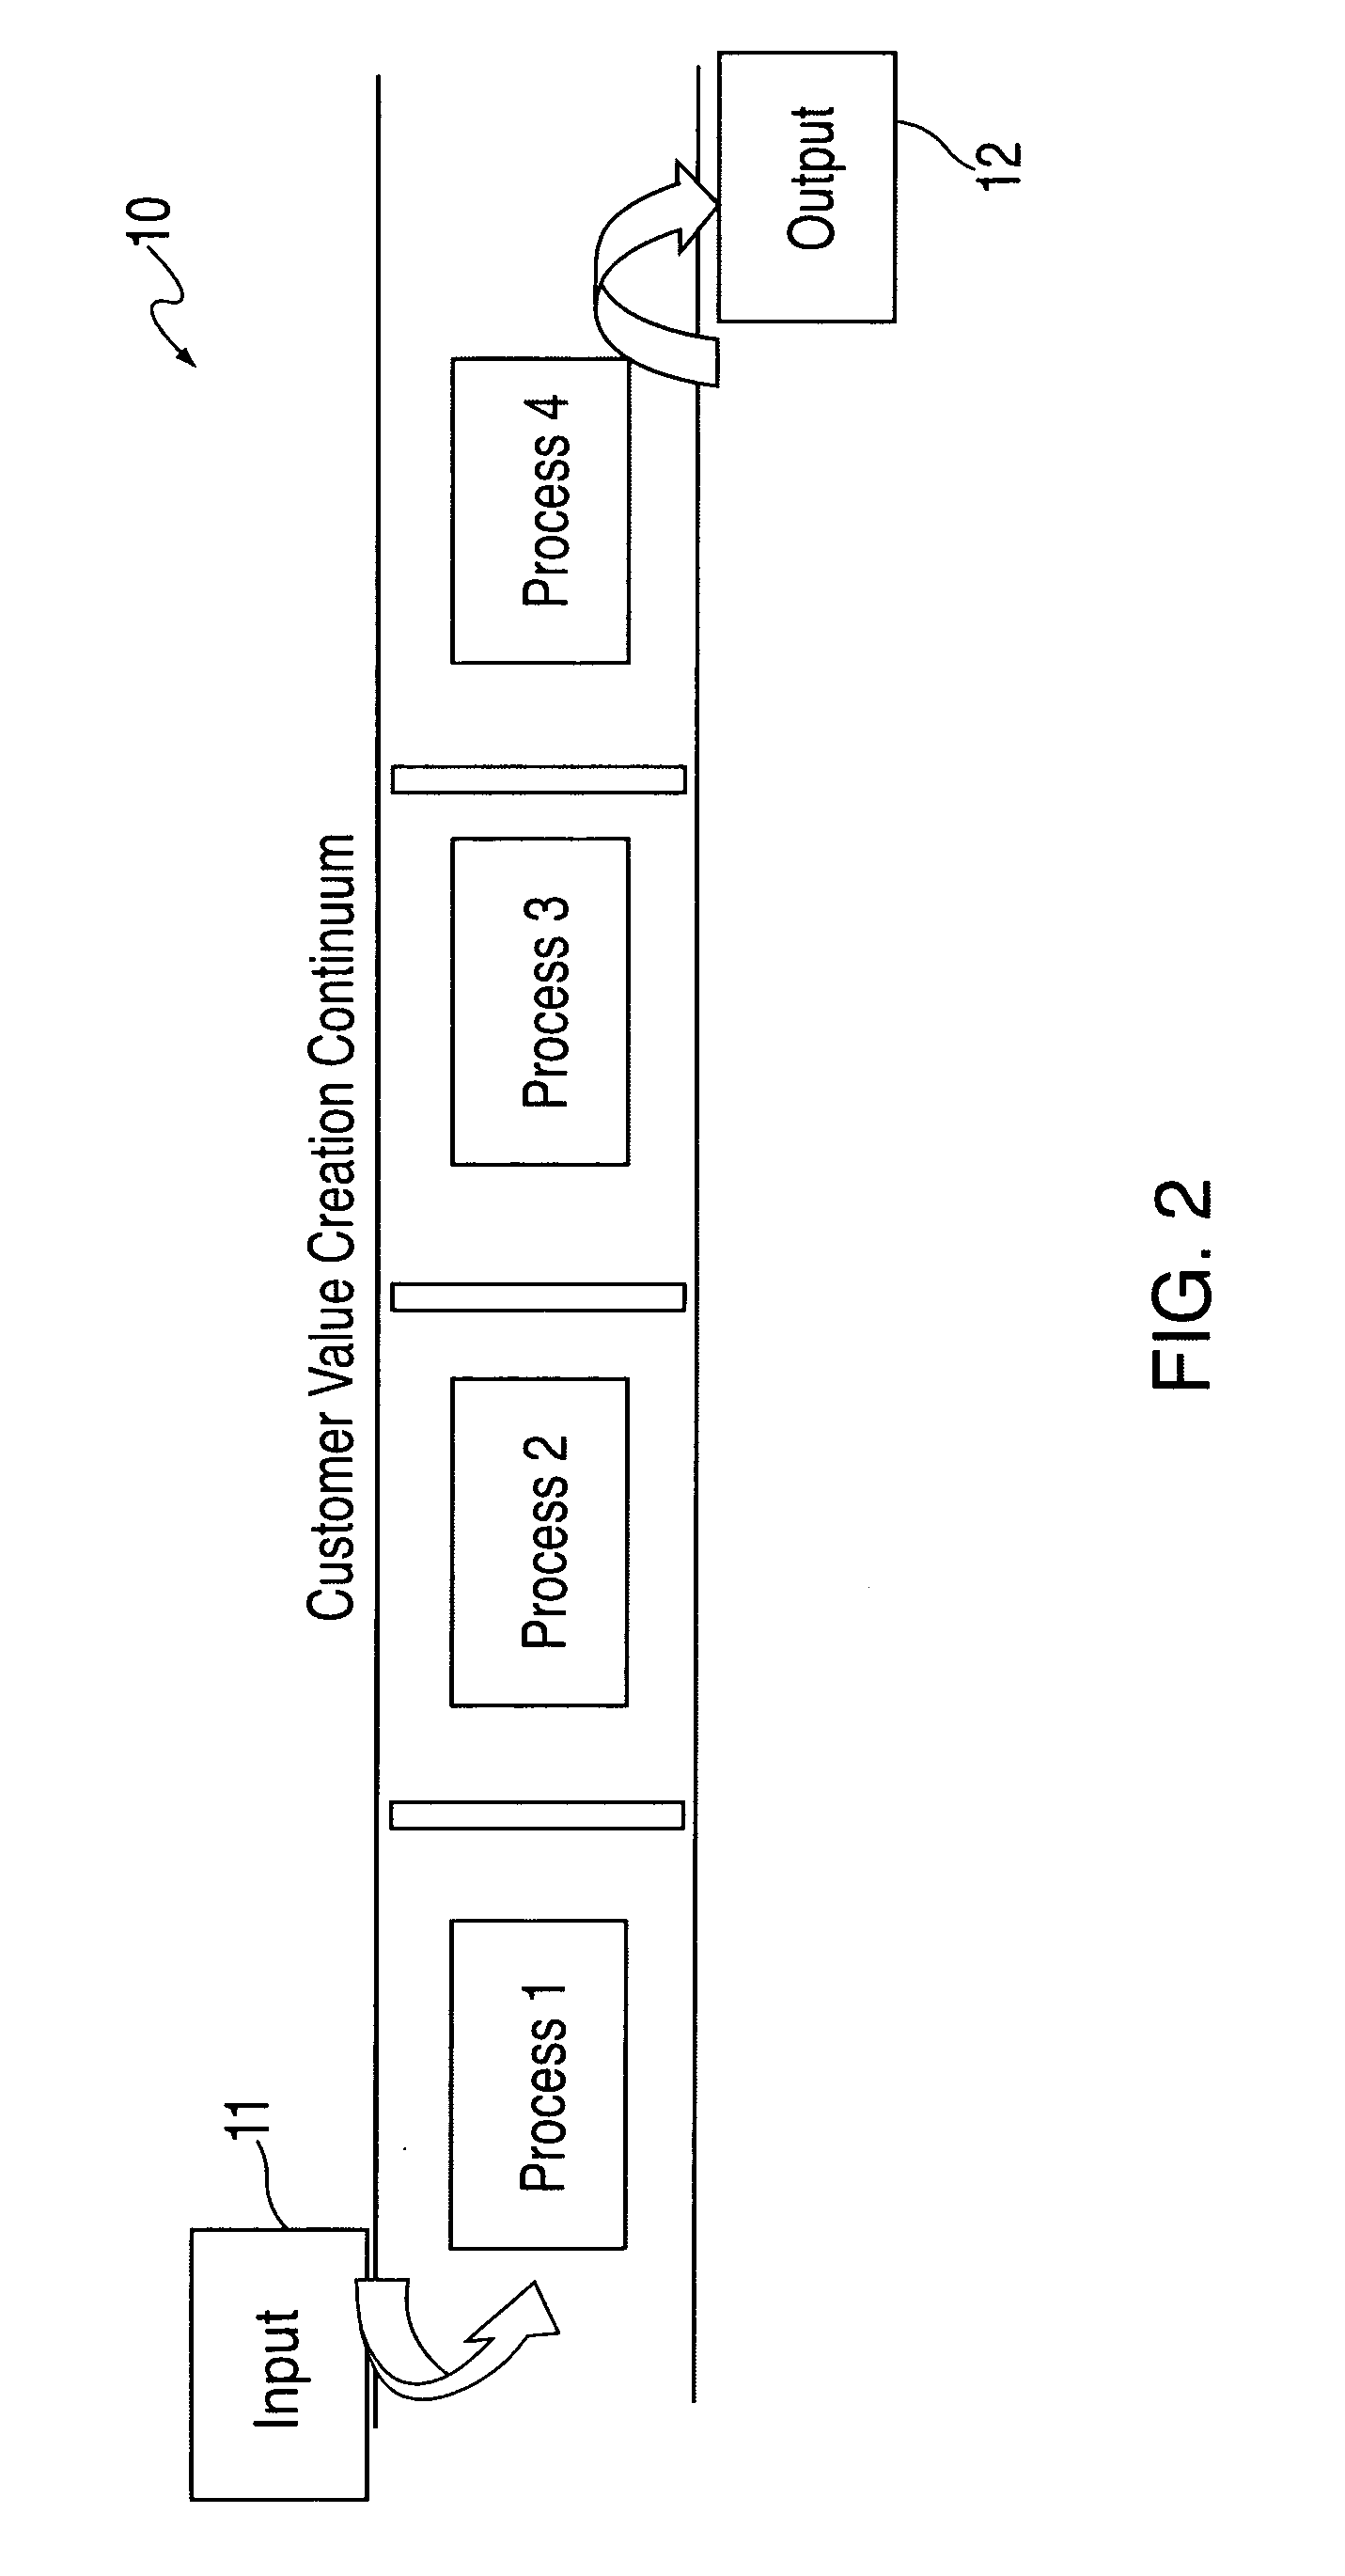 Method and apparatus for a processing risk assessment and operational oversight framework